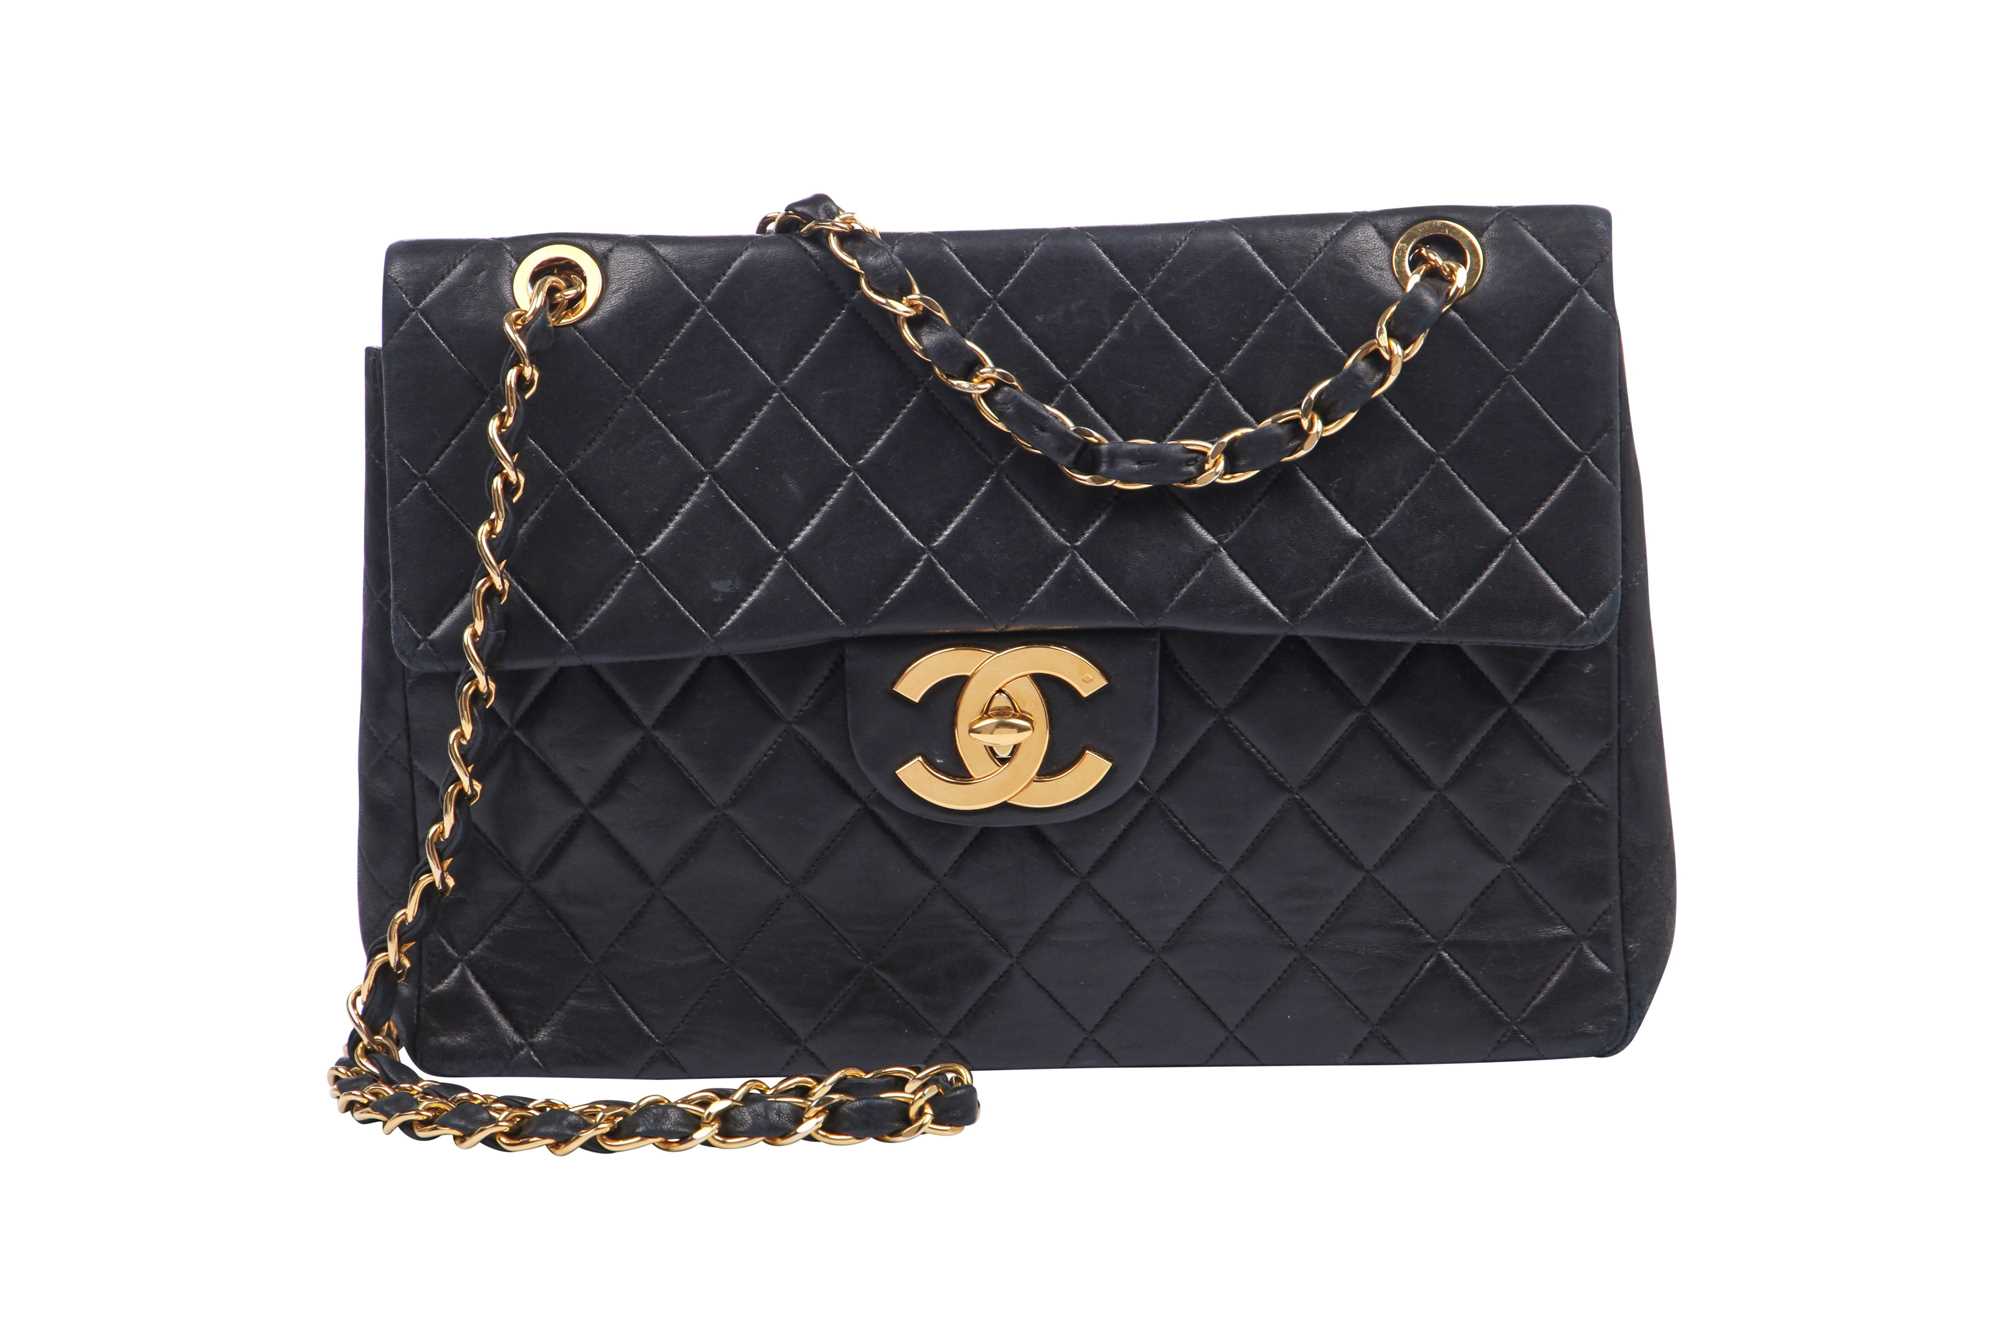 Lot 4 - A Chanel quilted navy lambskin leather jumbo flap bag, circa 1994-96